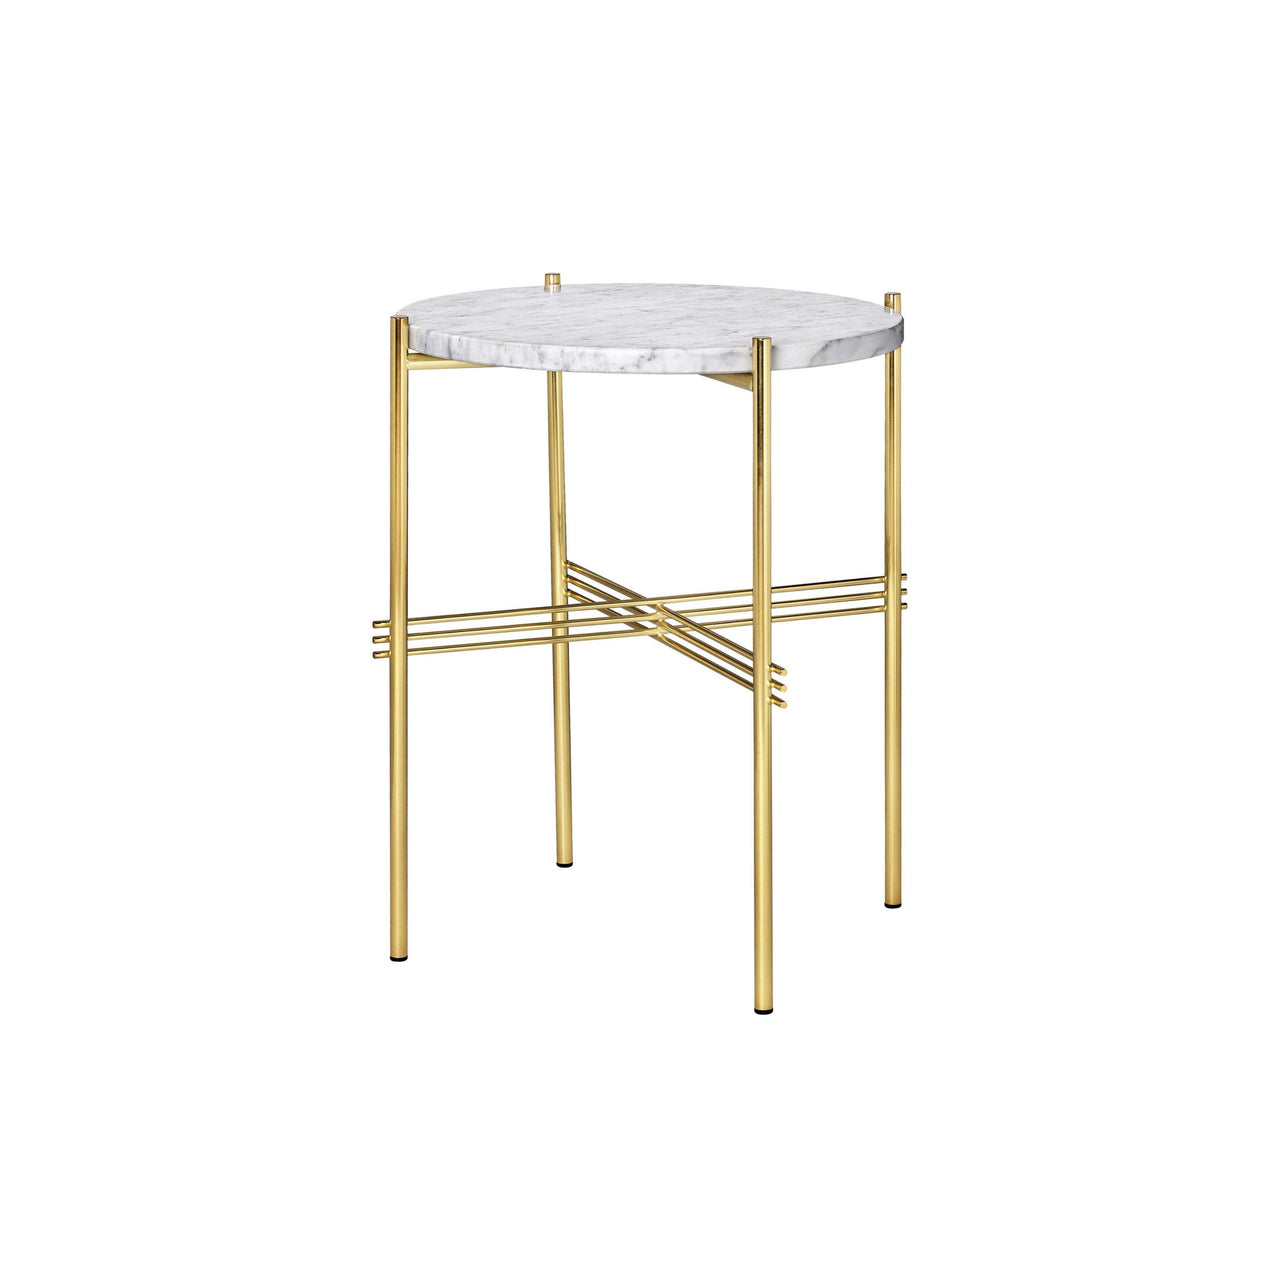 TS Round Side Table: Brass + White Carrara Marble